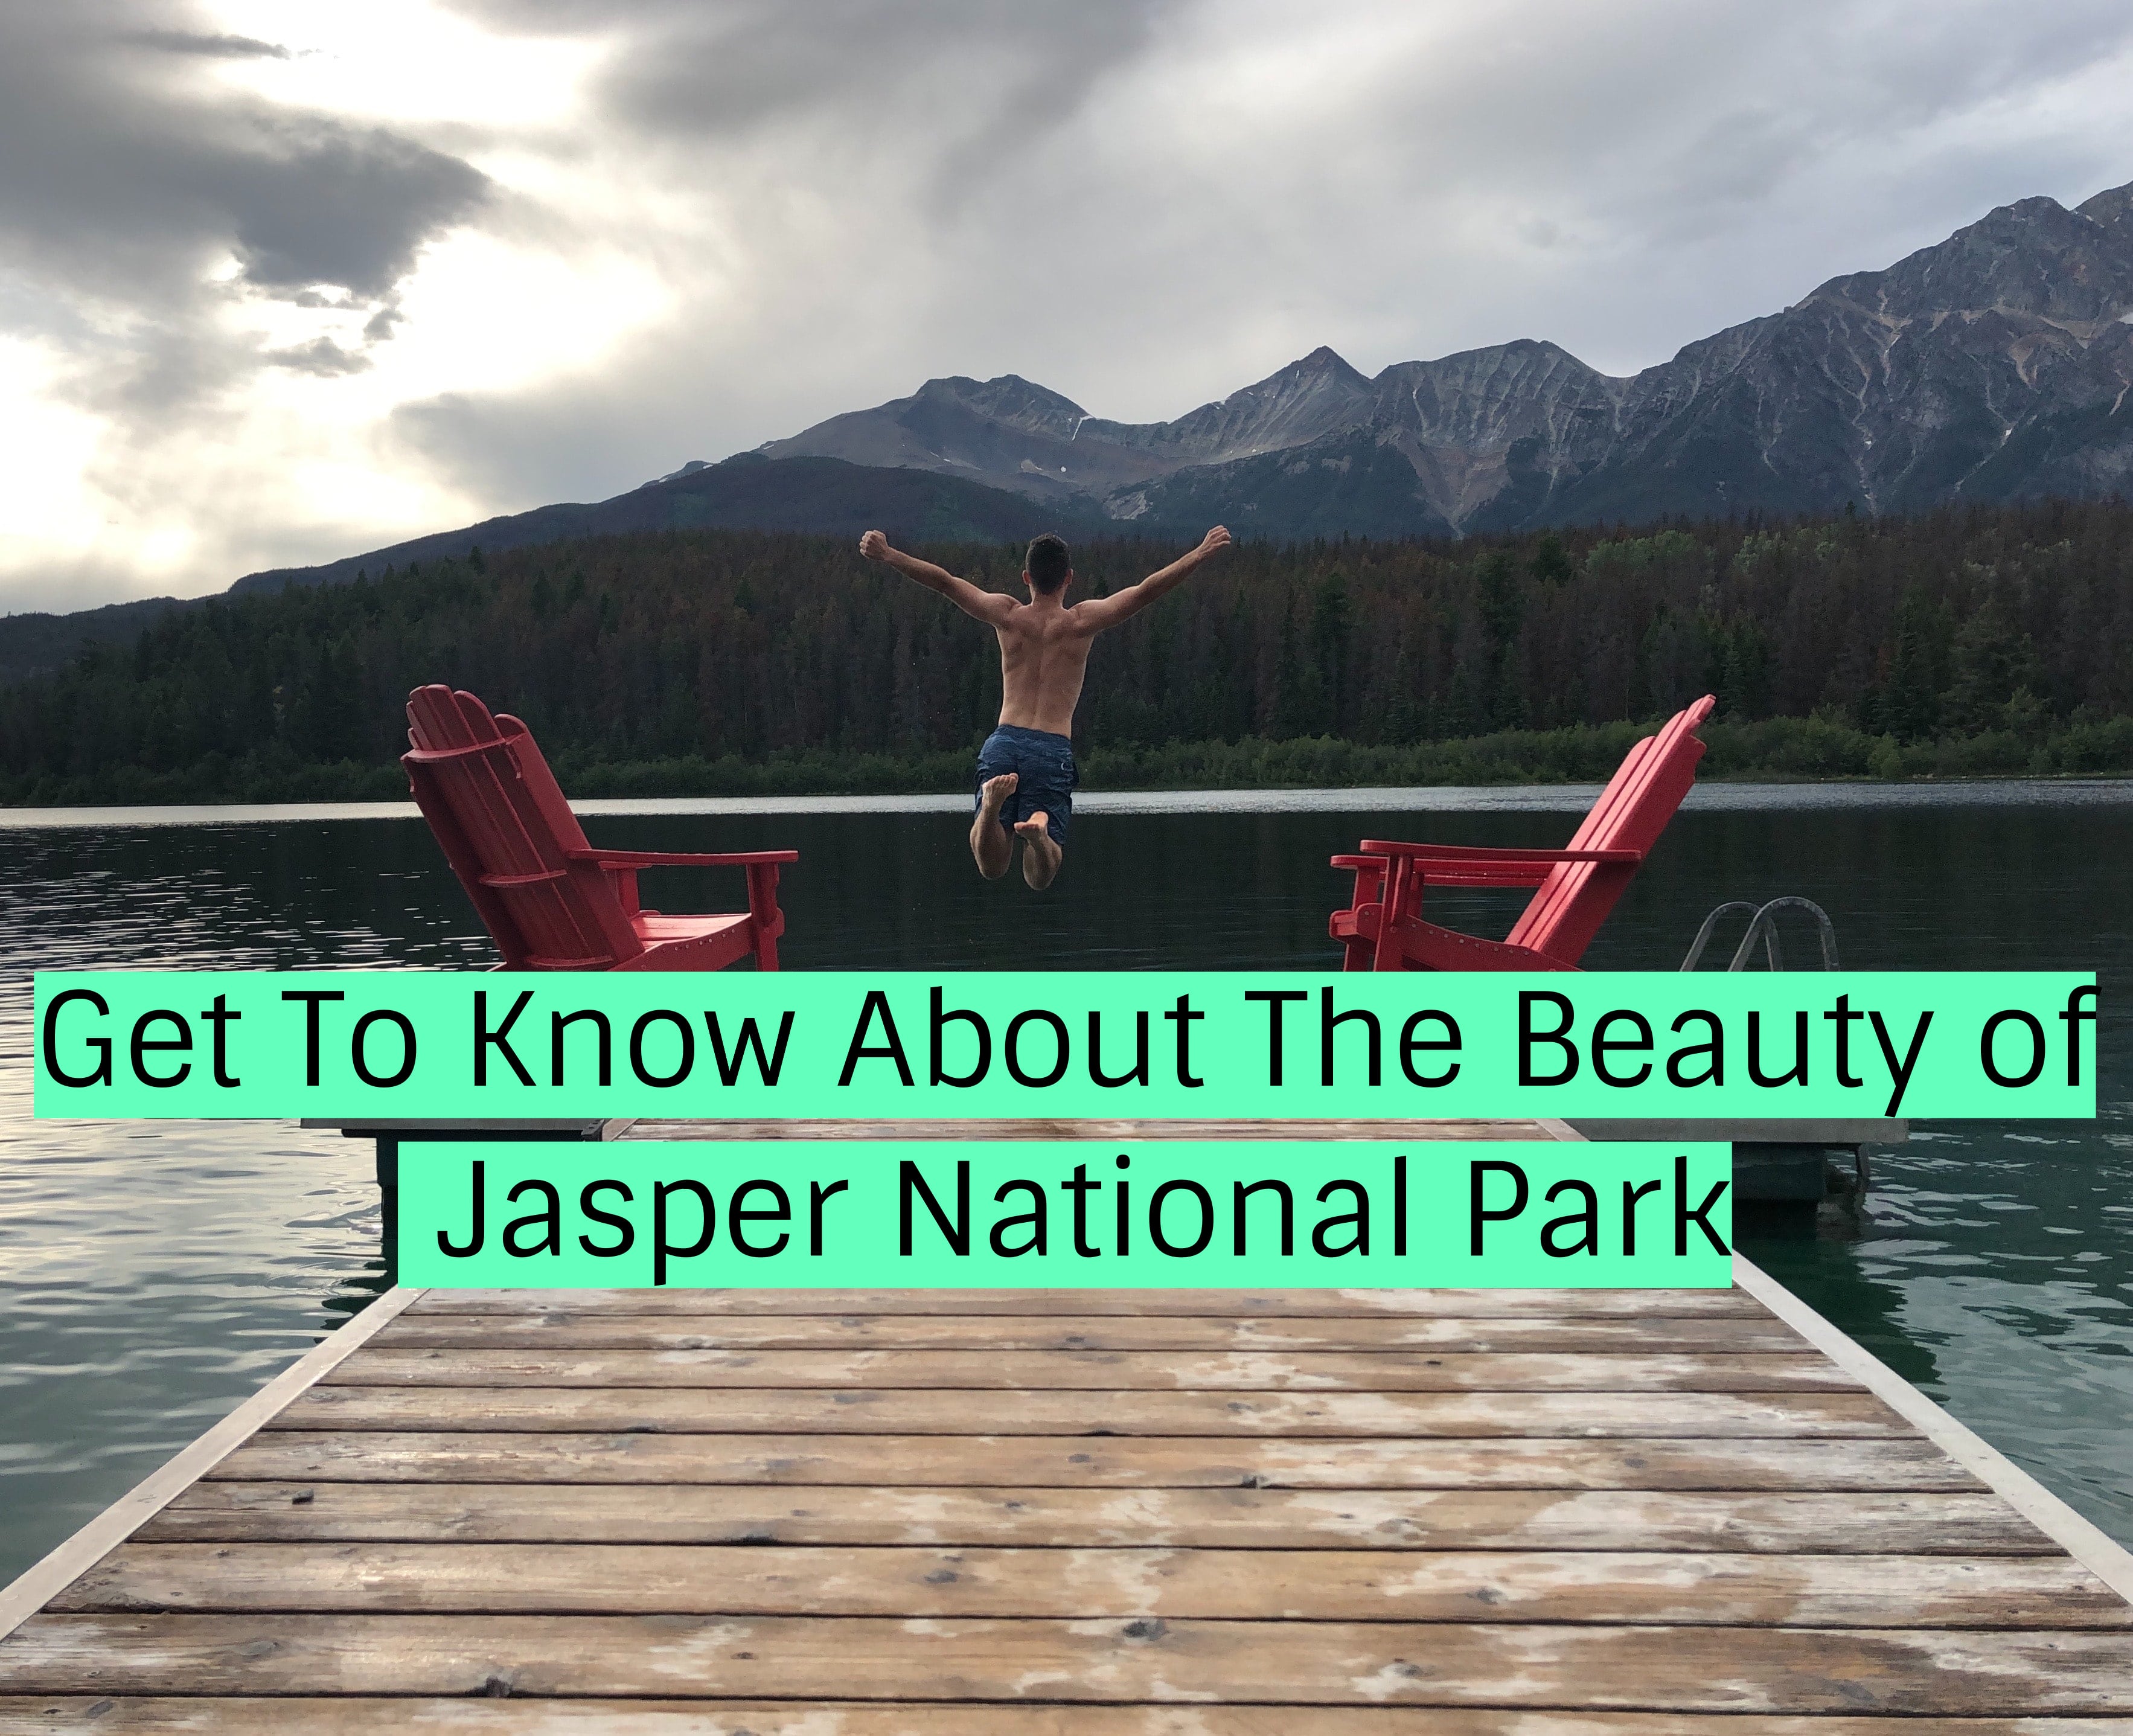 Get To Know About The Beauty of Jasper National Park